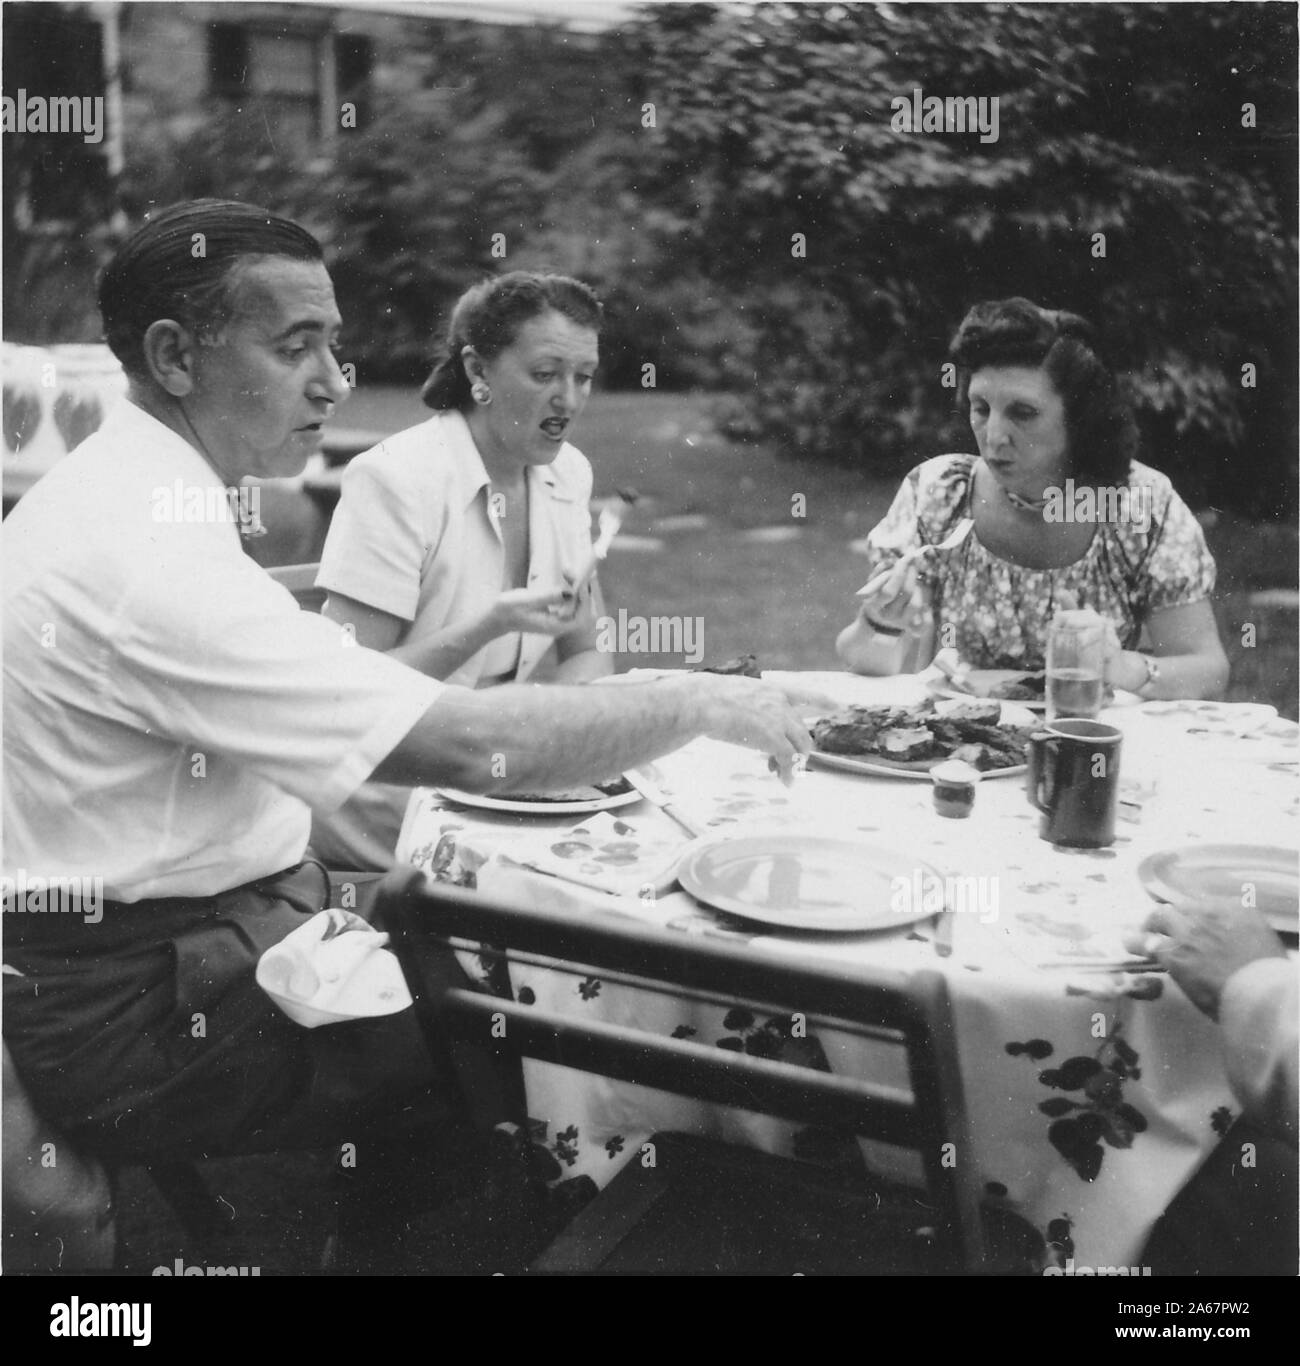 Three members of a Jewish-American family sit outdoors around a small table and eat a picnic, with two women in mid conversation and man reaching for a plate of food, New York City, New York, 1948. () Stock Photo